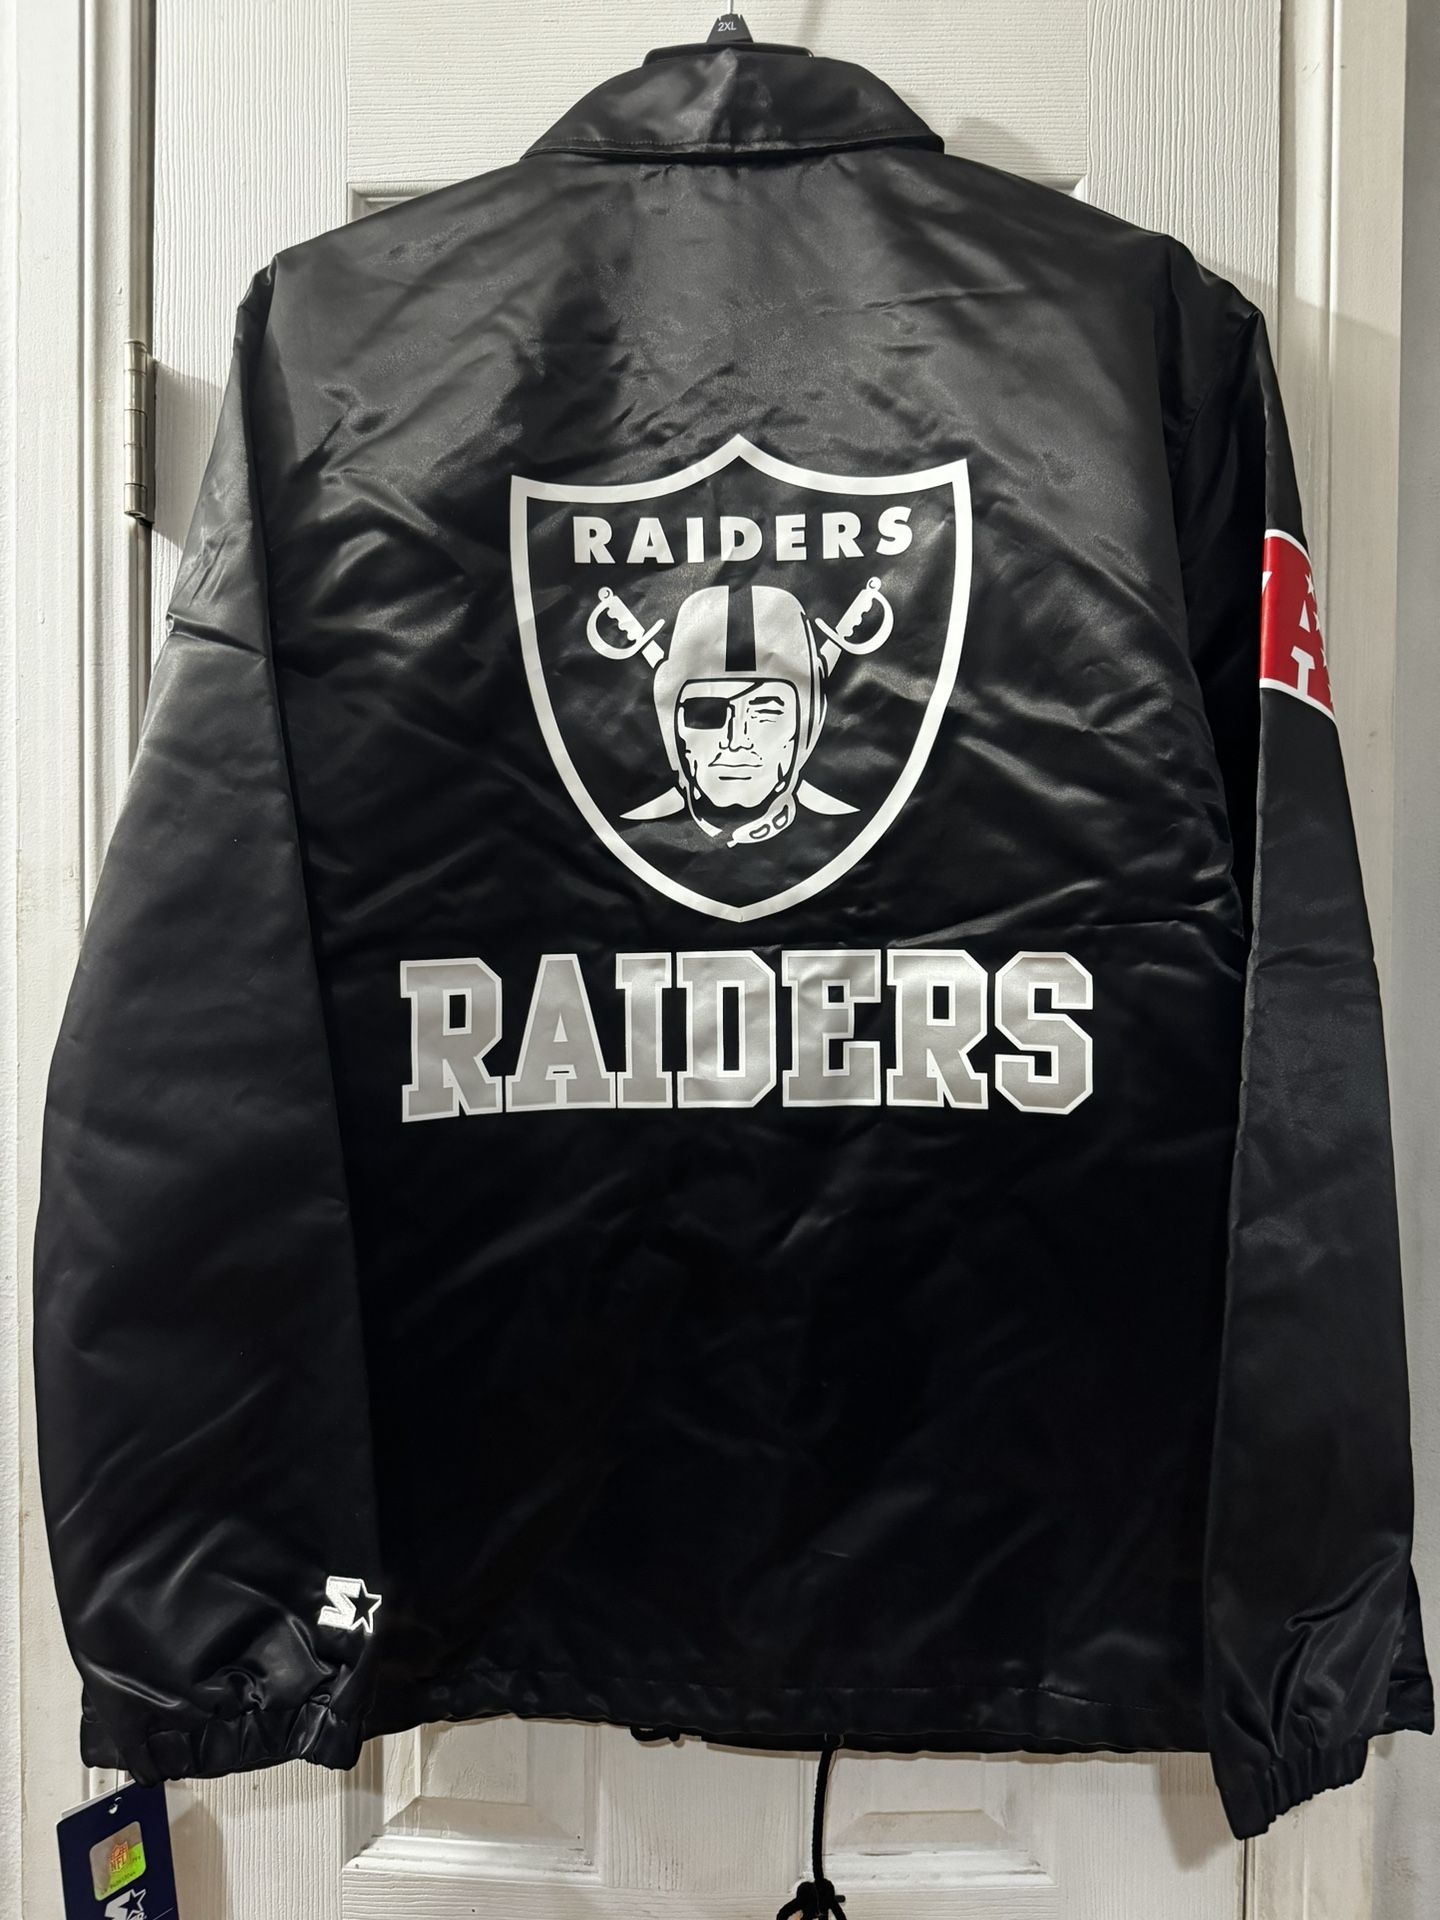 Raiders Starter Jacket Coaches Rain Coat New With Tags Size 2XL